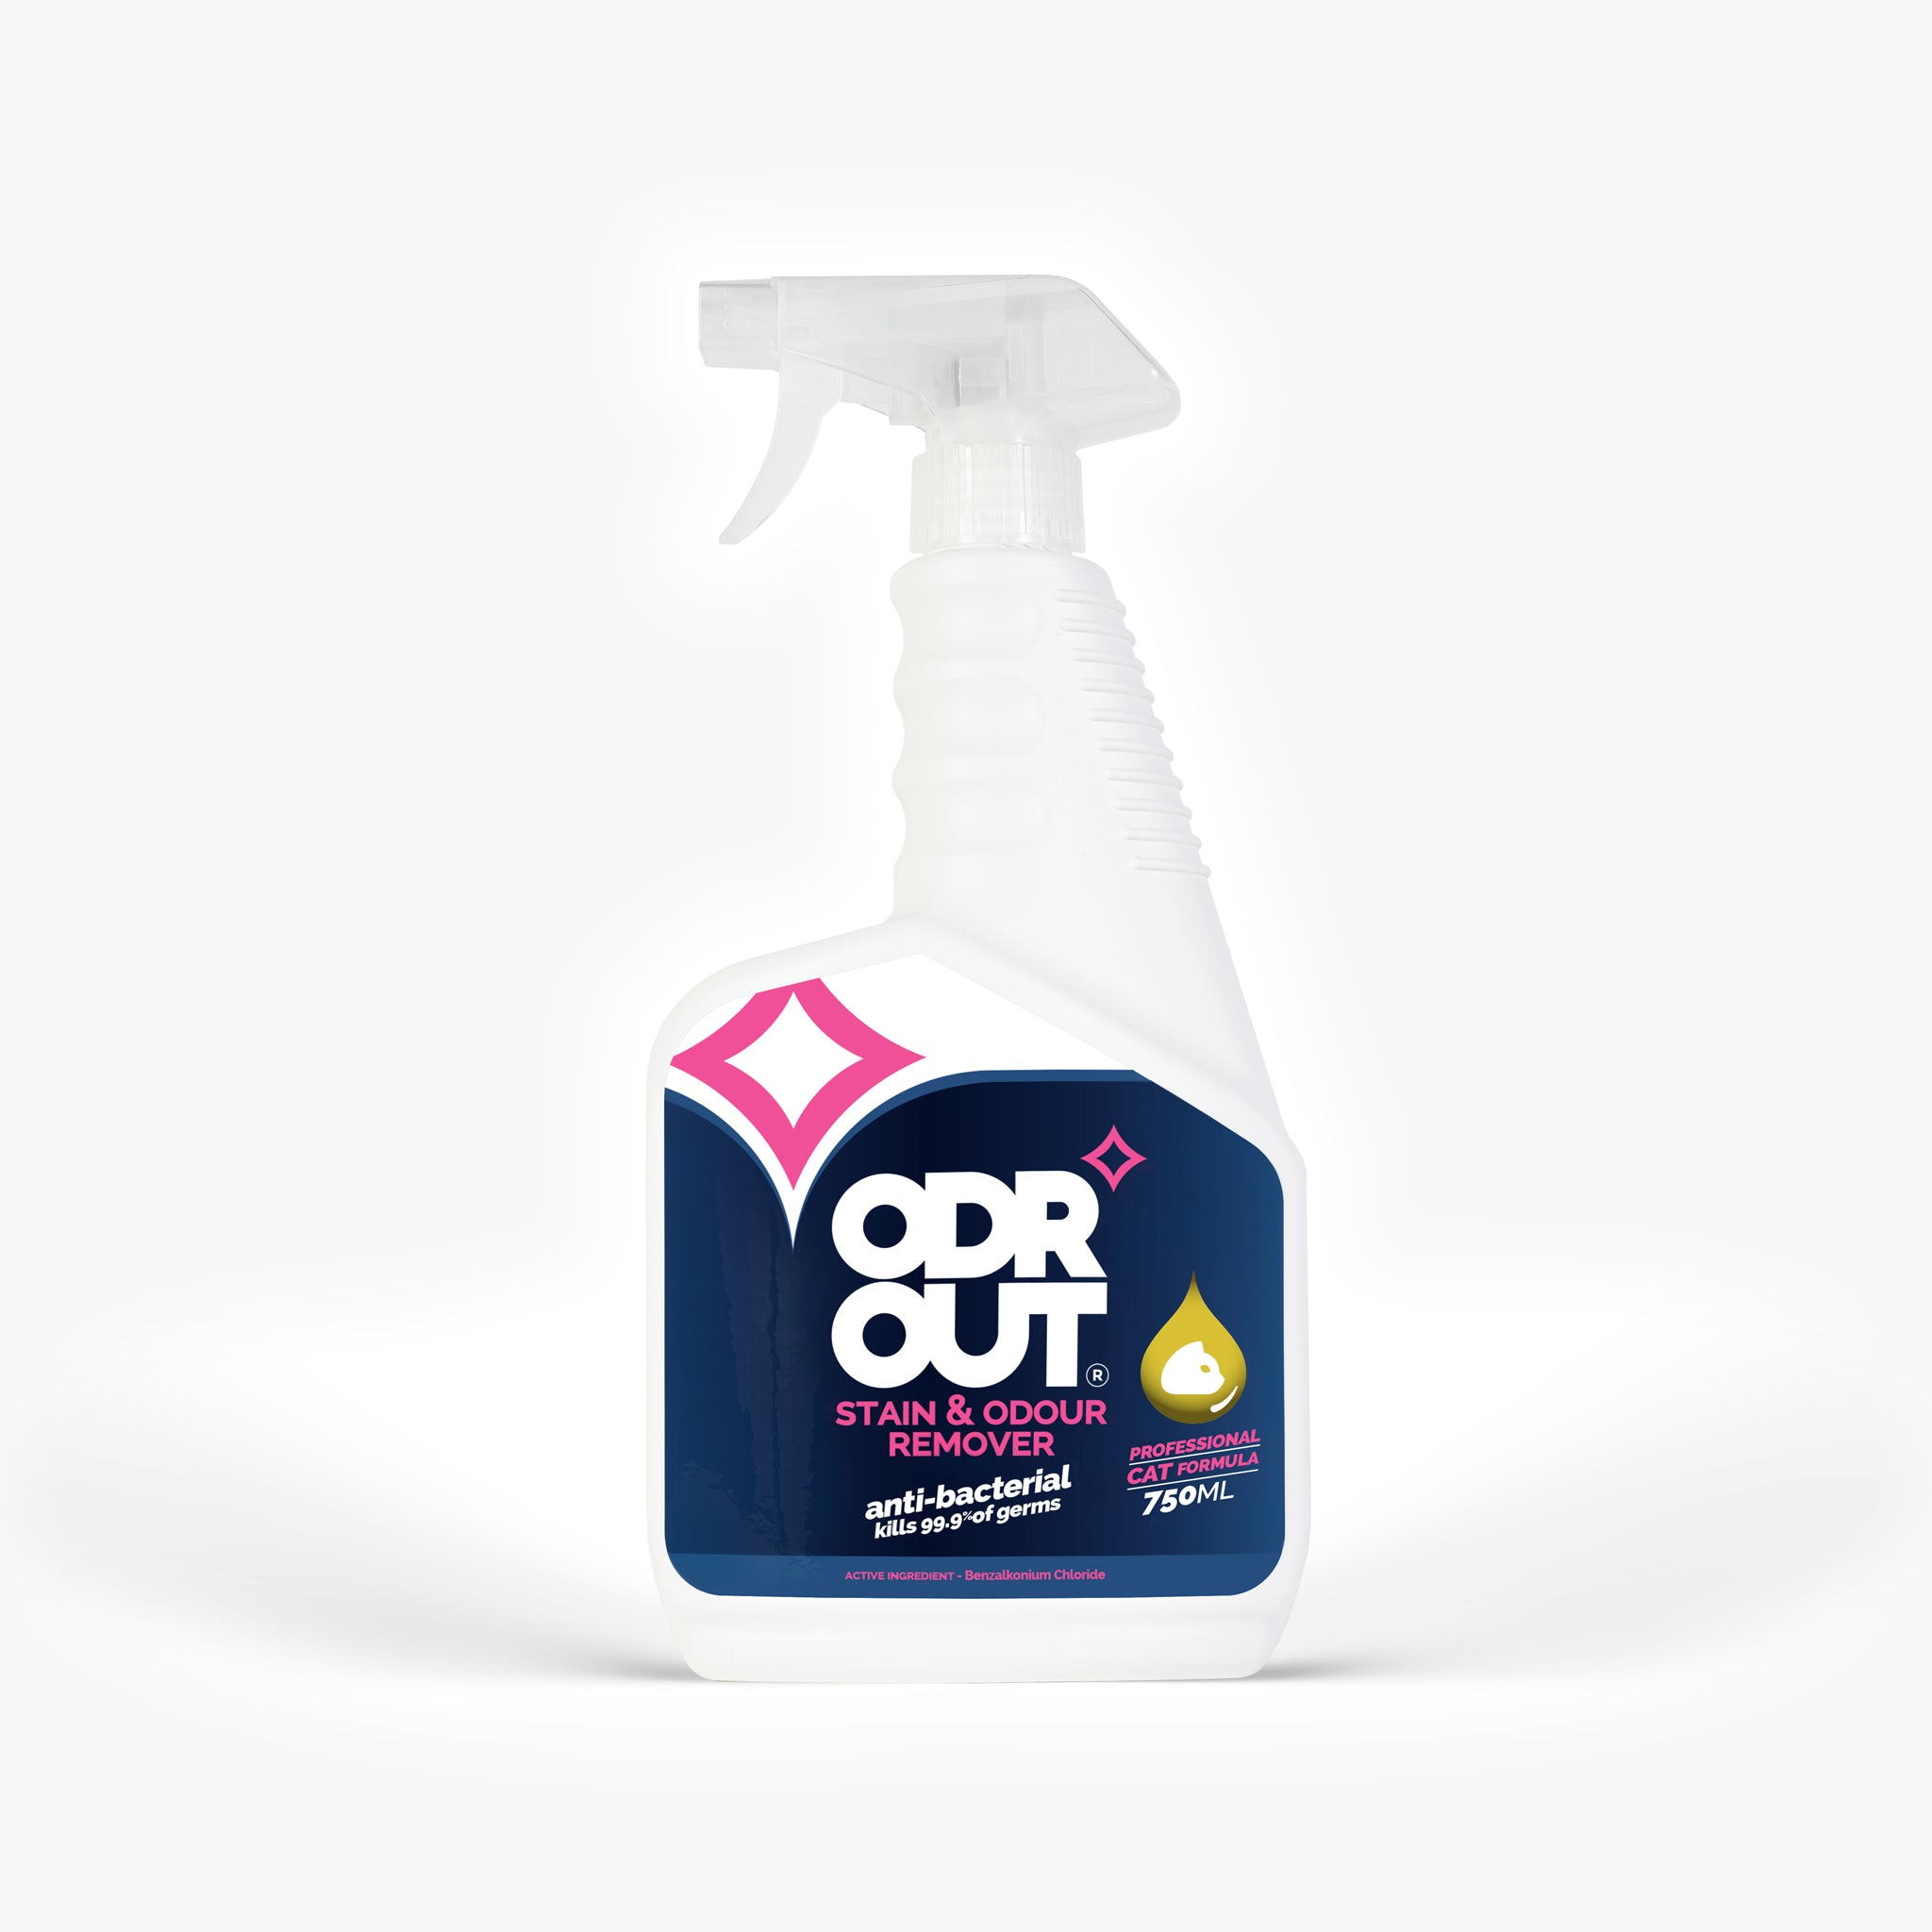 ODR OUT Stain And Odour Remover - Cat